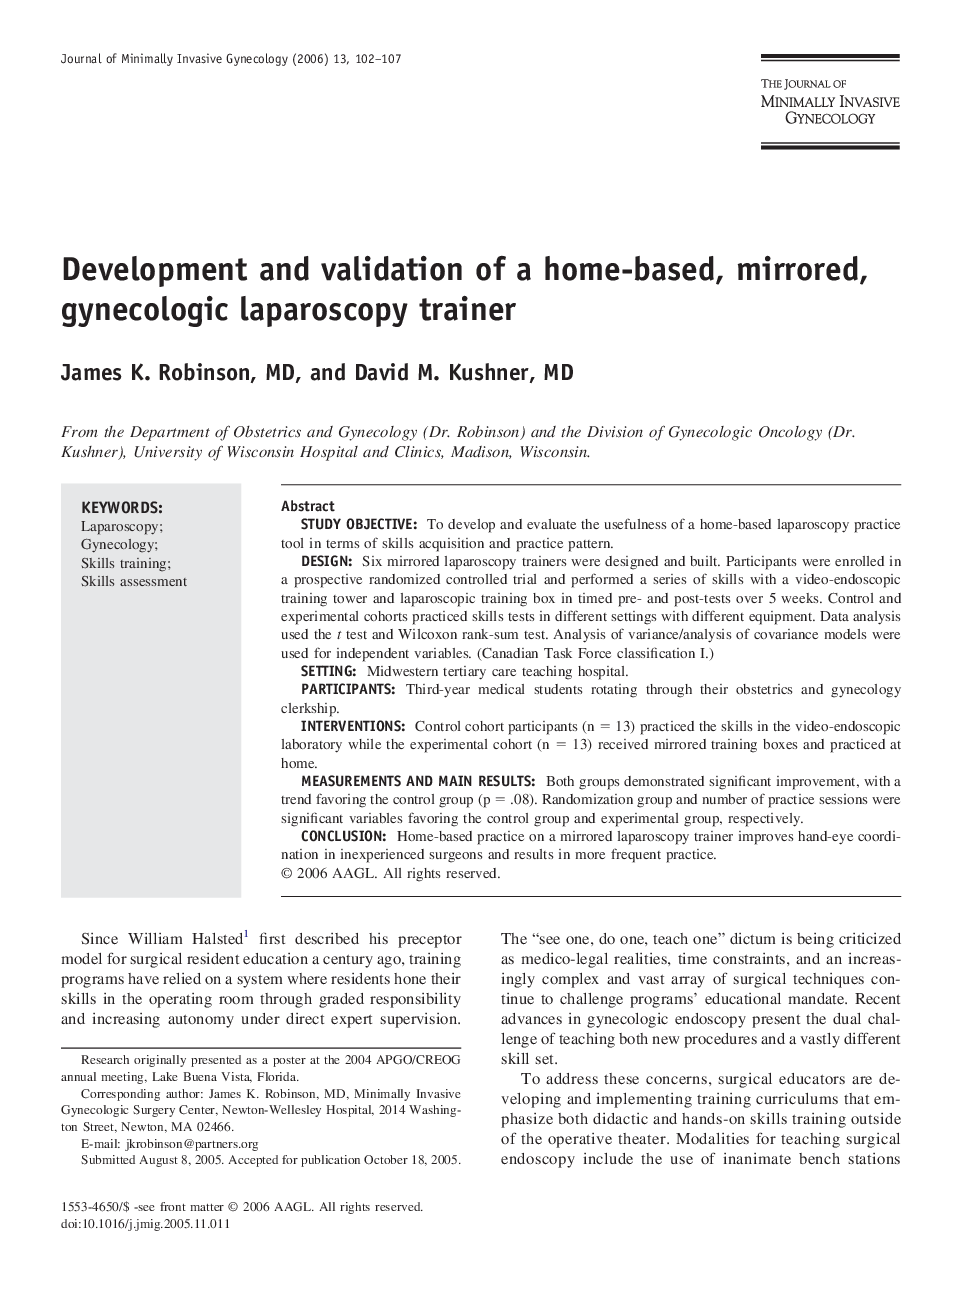 Development and validation of a home-based, mirrored, gynecologic laparoscopy trainer